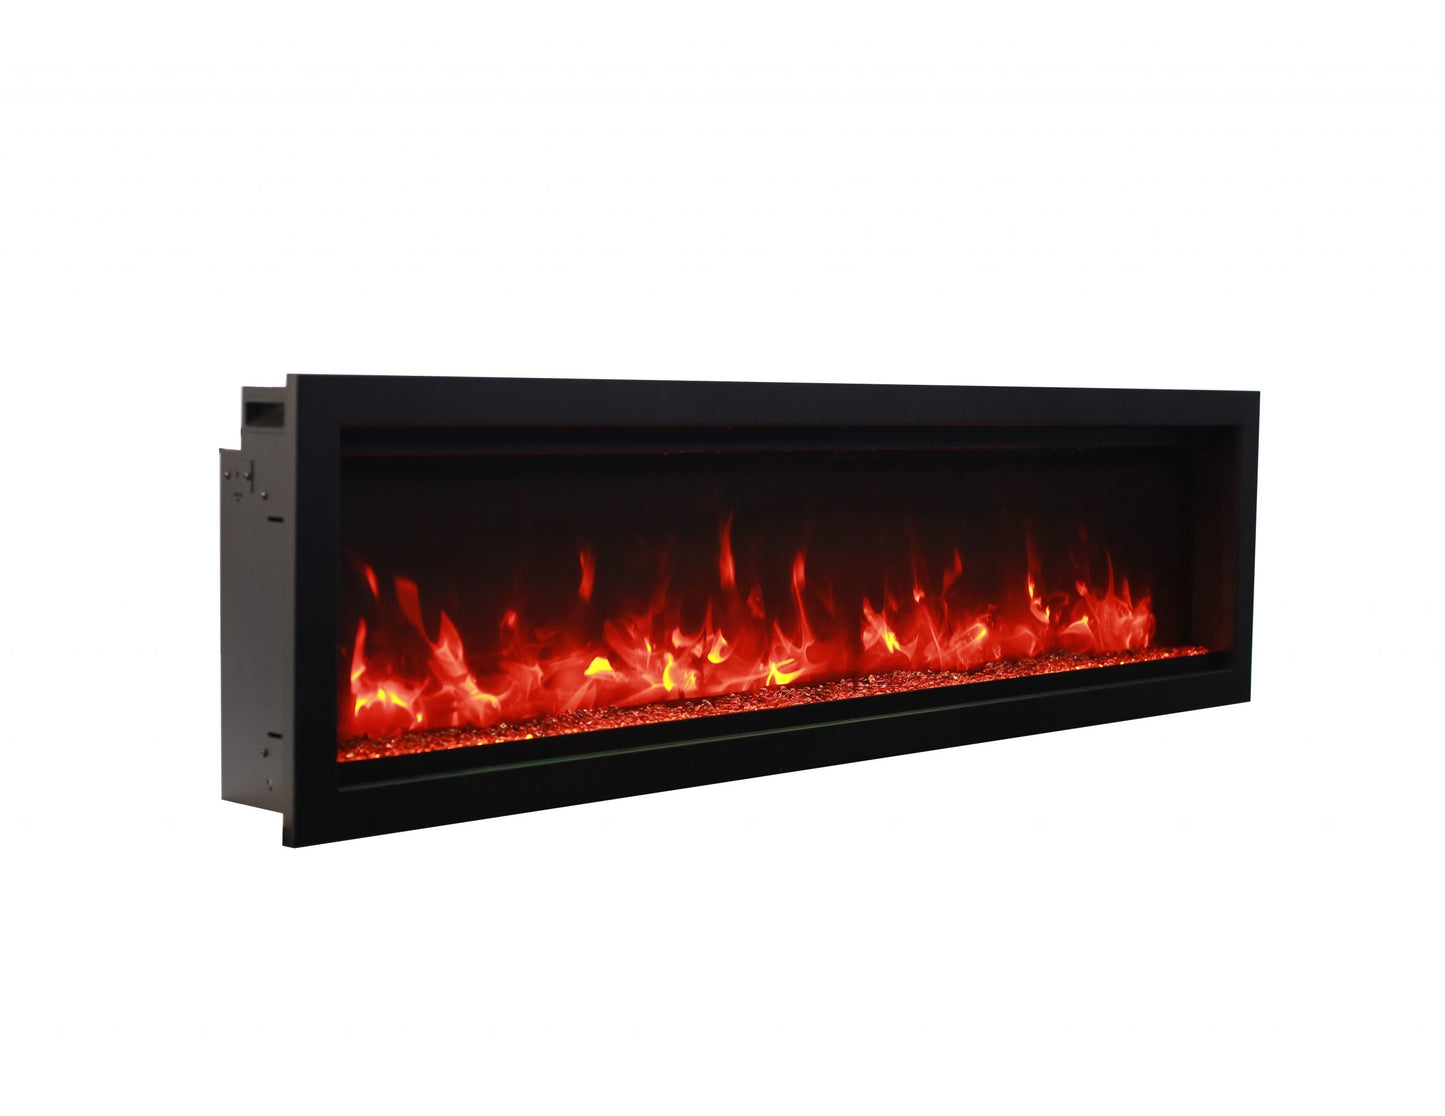 Amantii Symmetry Bespoke Electric Fireplace – Built-in With Log and Glass and Black Steel Surround